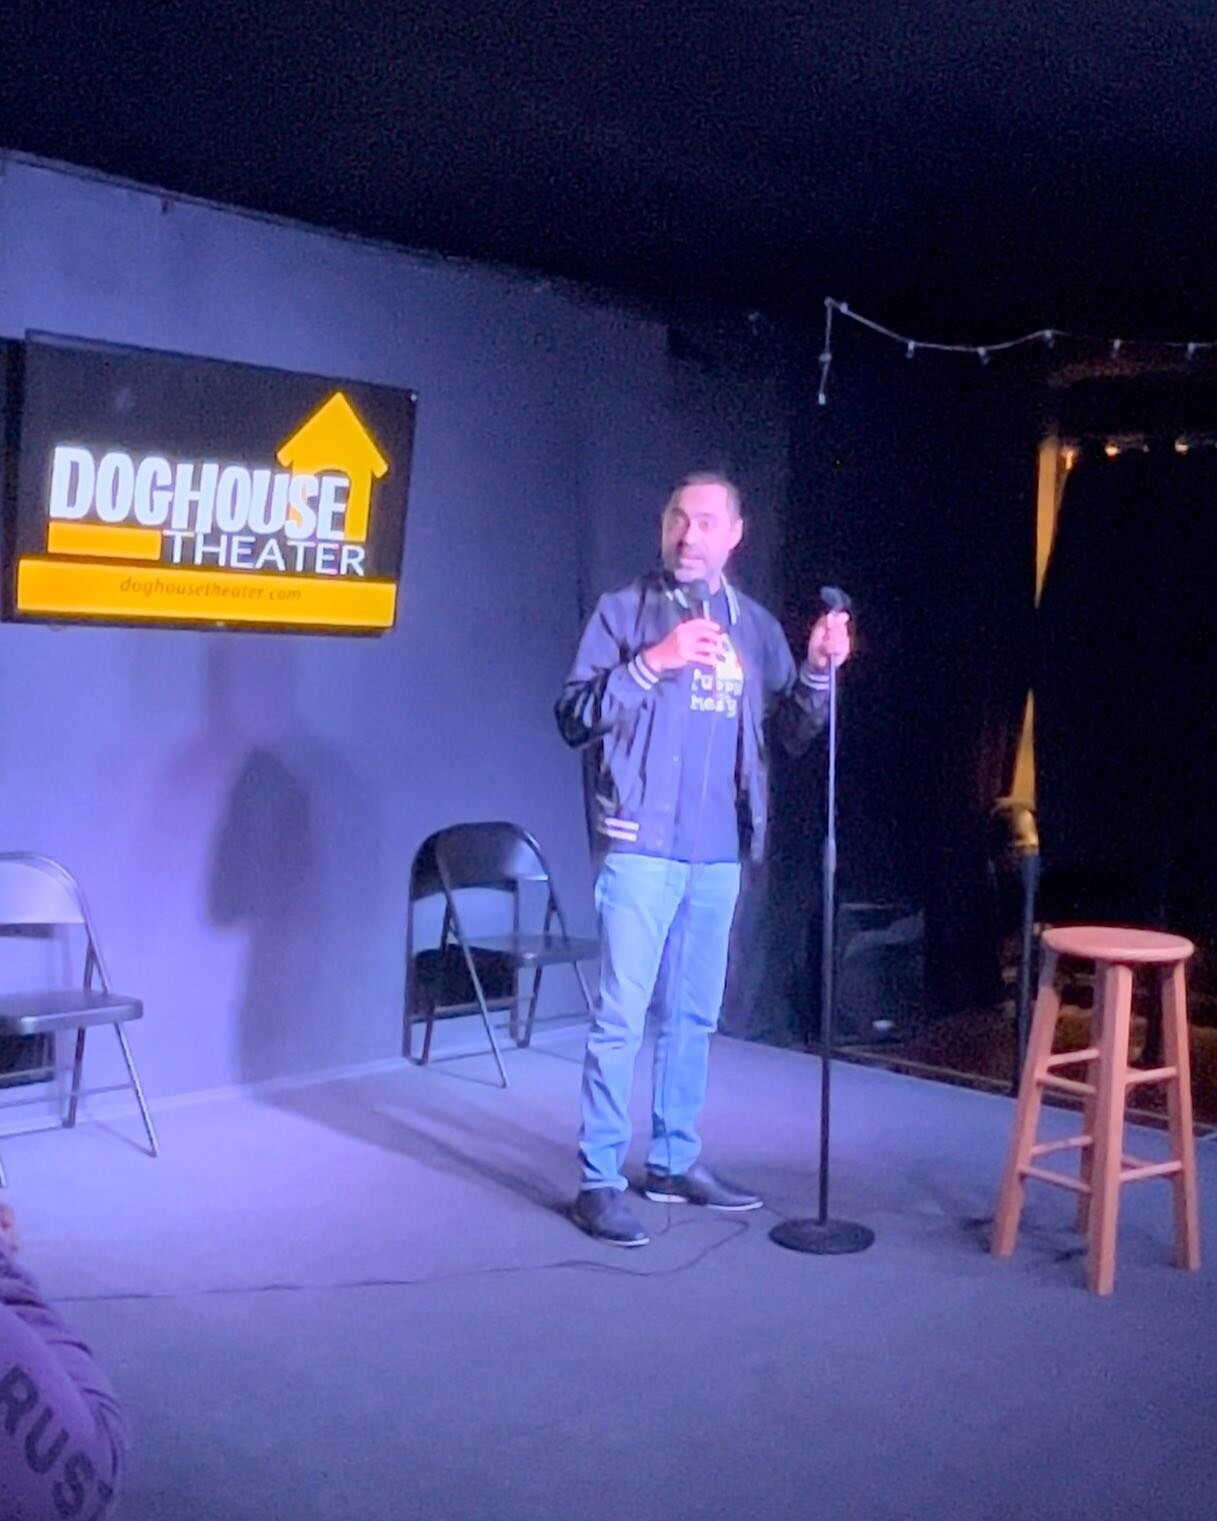 FUN SET -&gt;
Just did a full crowd work set at @doghousetheater  for @sickpupscomedy , met some really cool people like Gabe, Maddie, Jessie, Lexie, Dijon, Caroline. even spotted @markchaha  there !